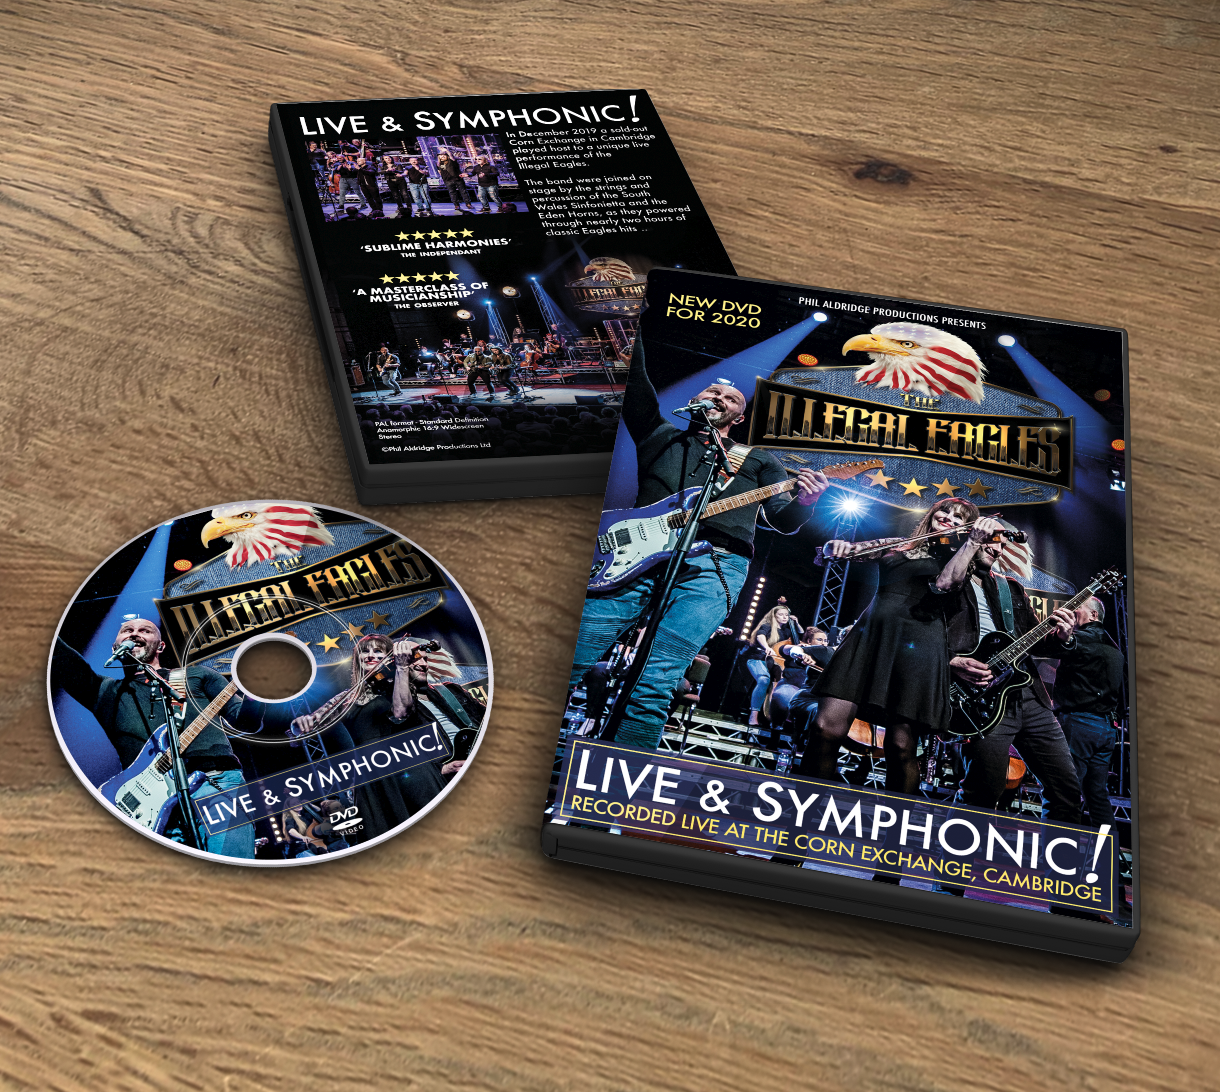 The Illegal Eagles - Live & Symphonic! - New DVD